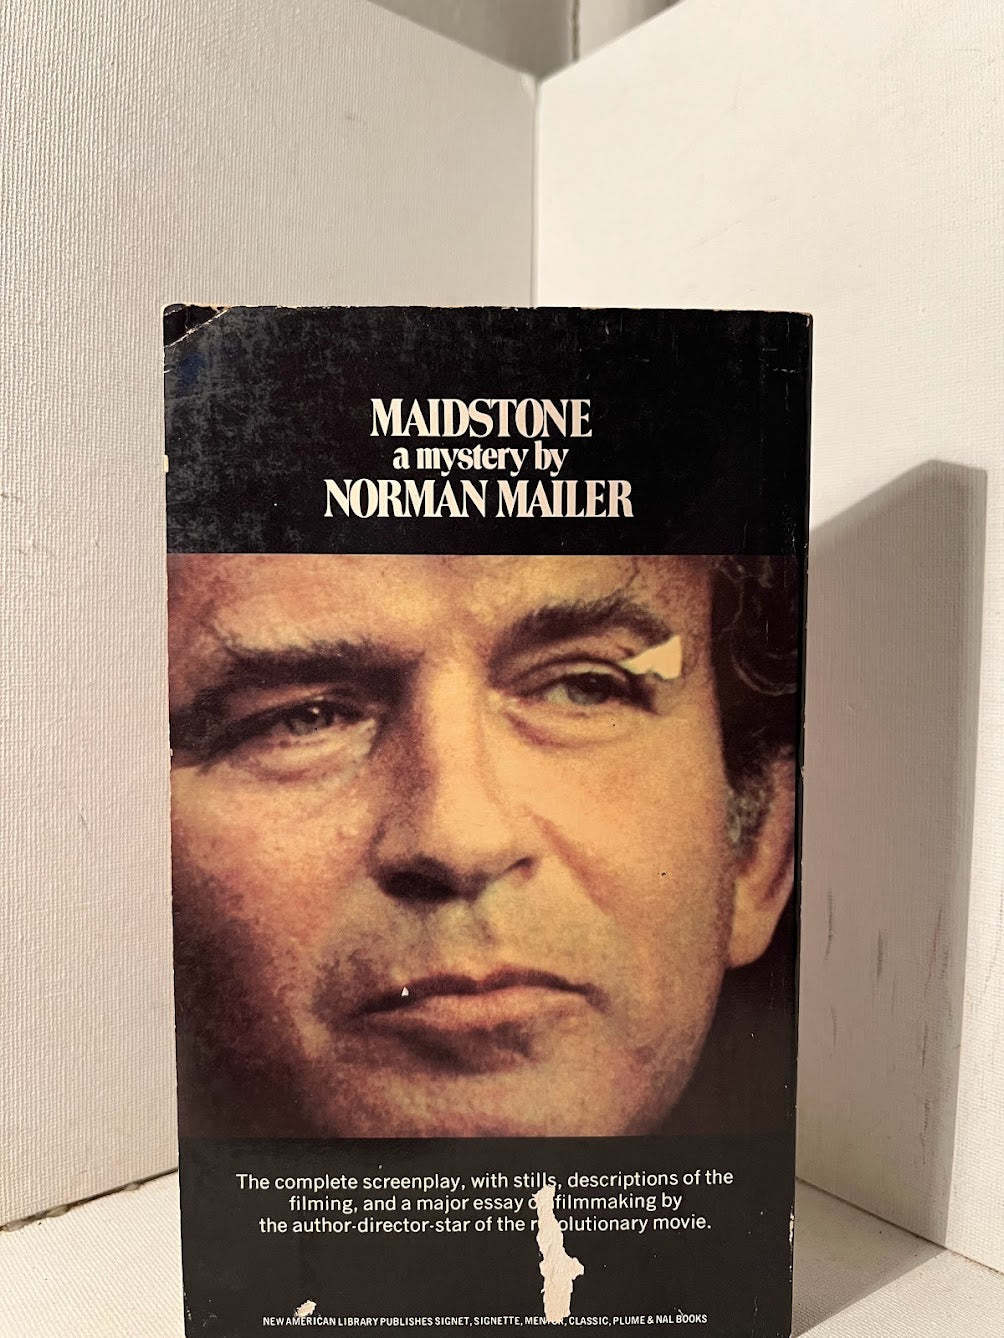 Maidstone by Norman Mailer